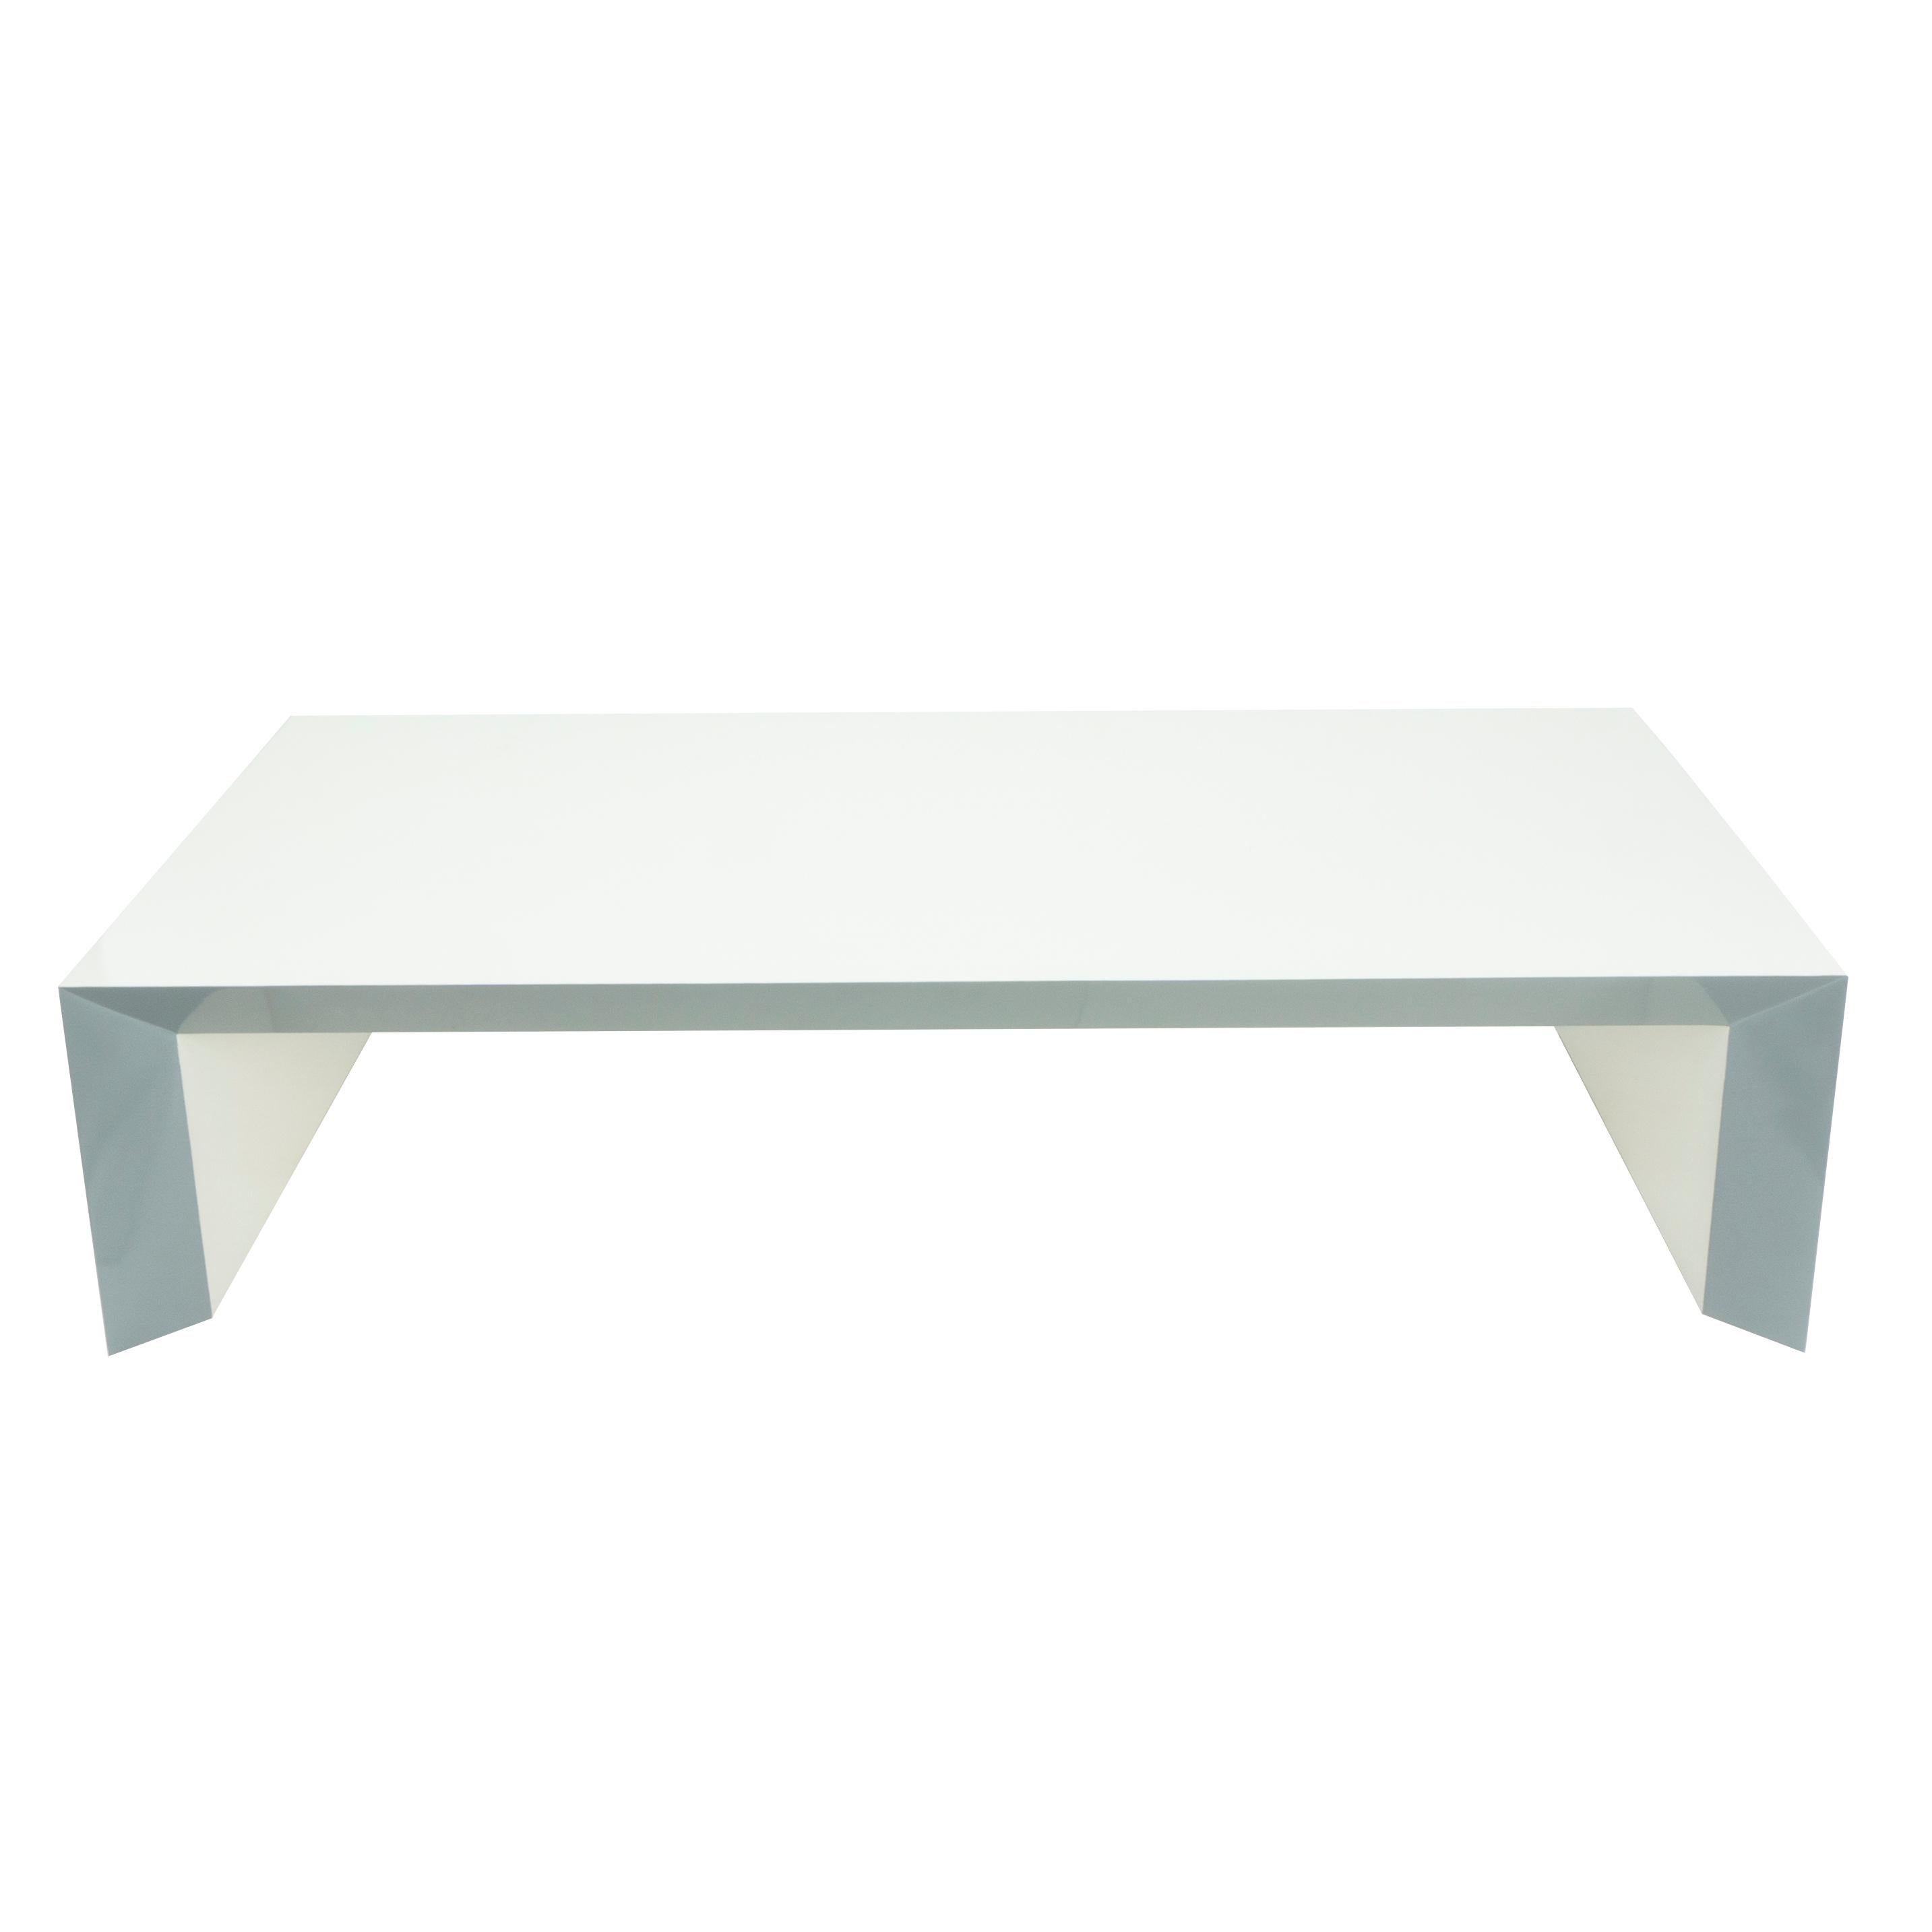 This modern and sleek coffee table is built to order and is customizable by size and finish. The table shown features a minimalistic design hand built and finished in white with soft grey accented beveled edges. 

Measurements: 16” H x 66” W x 36”